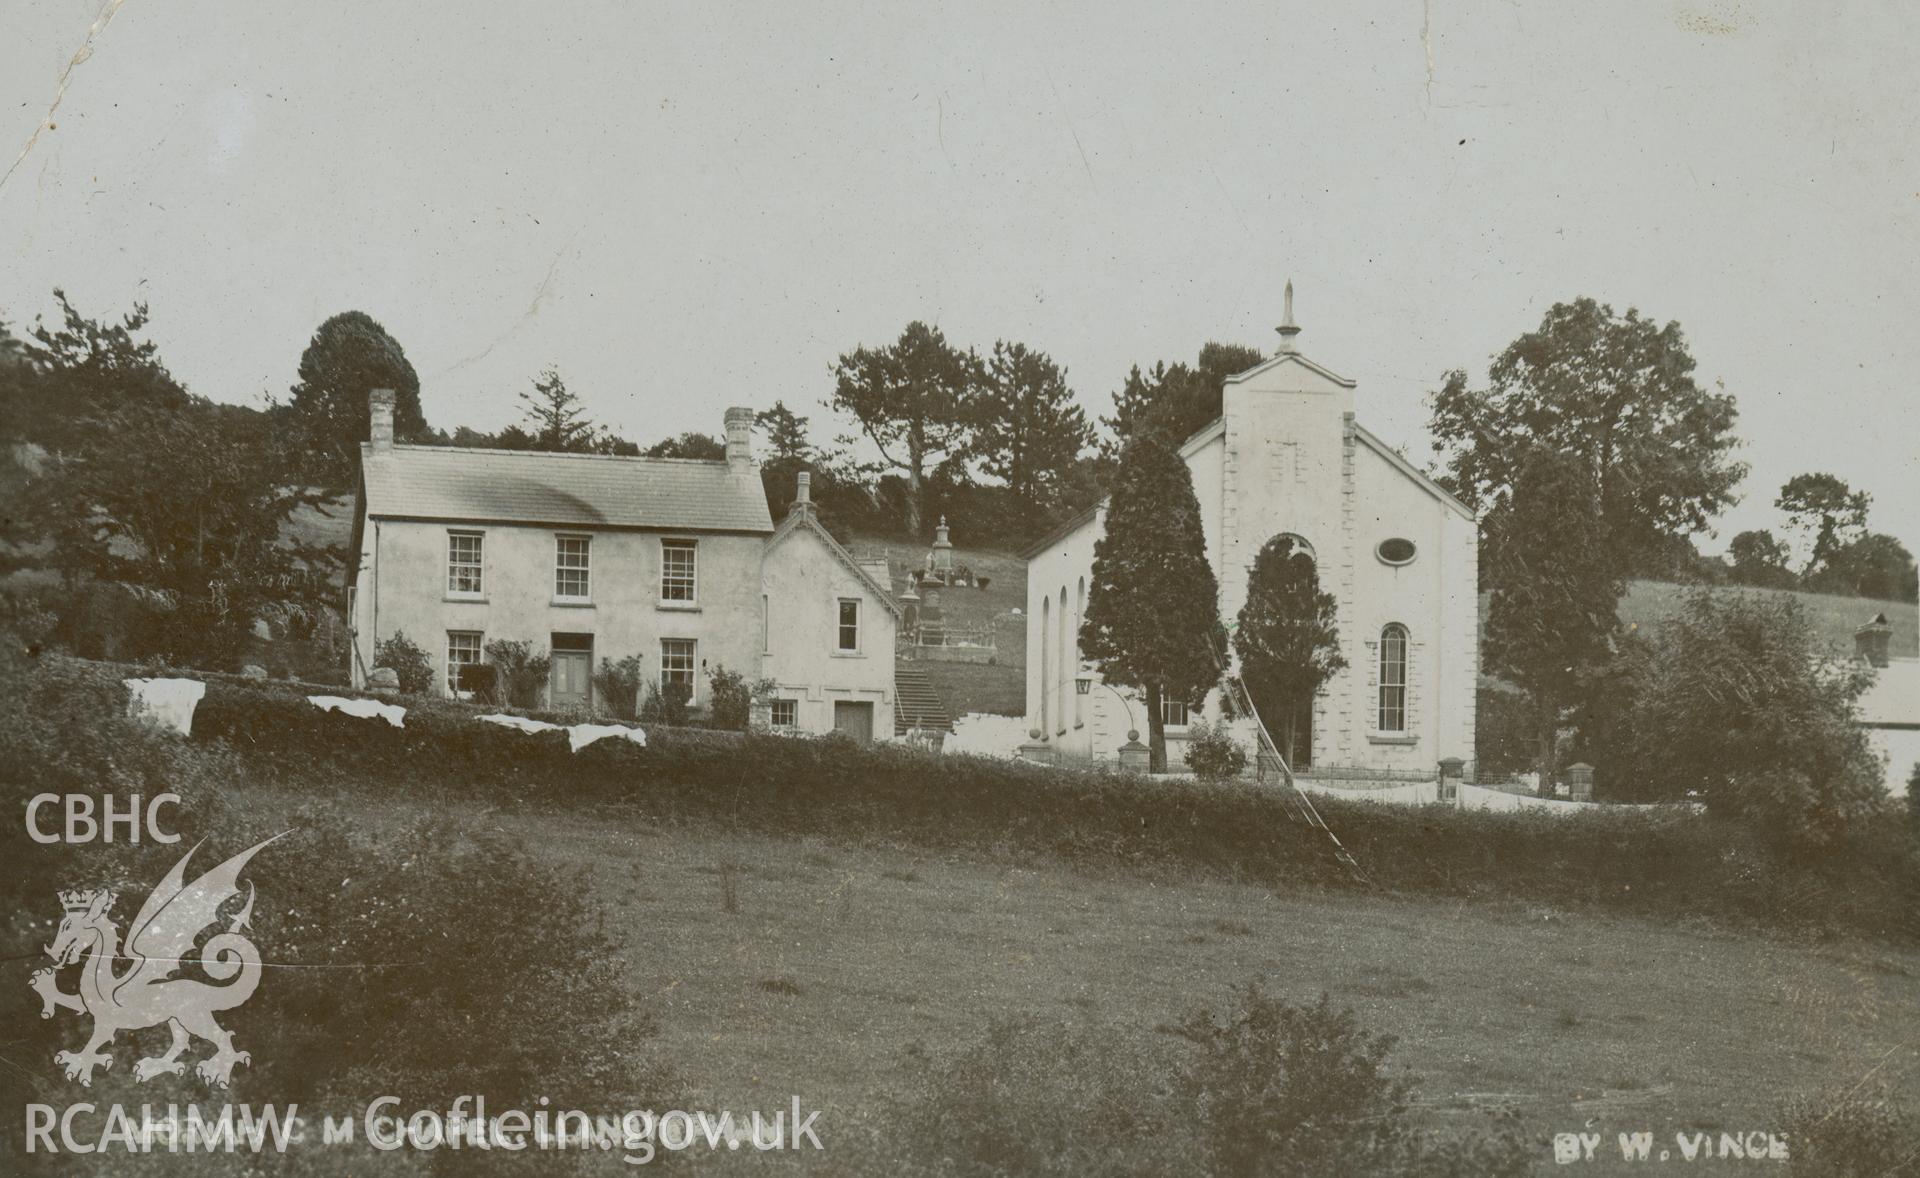 Digital copy of black and white postcard showing exterior view of Moreia Welsh Calvinisic Methodist chapel, Llansteffan. Bottom right of postcard reads 'BY W. VINCE.' Postcard was franked on 5th July 1909. Loaned for copying by Thomas Lloyd.